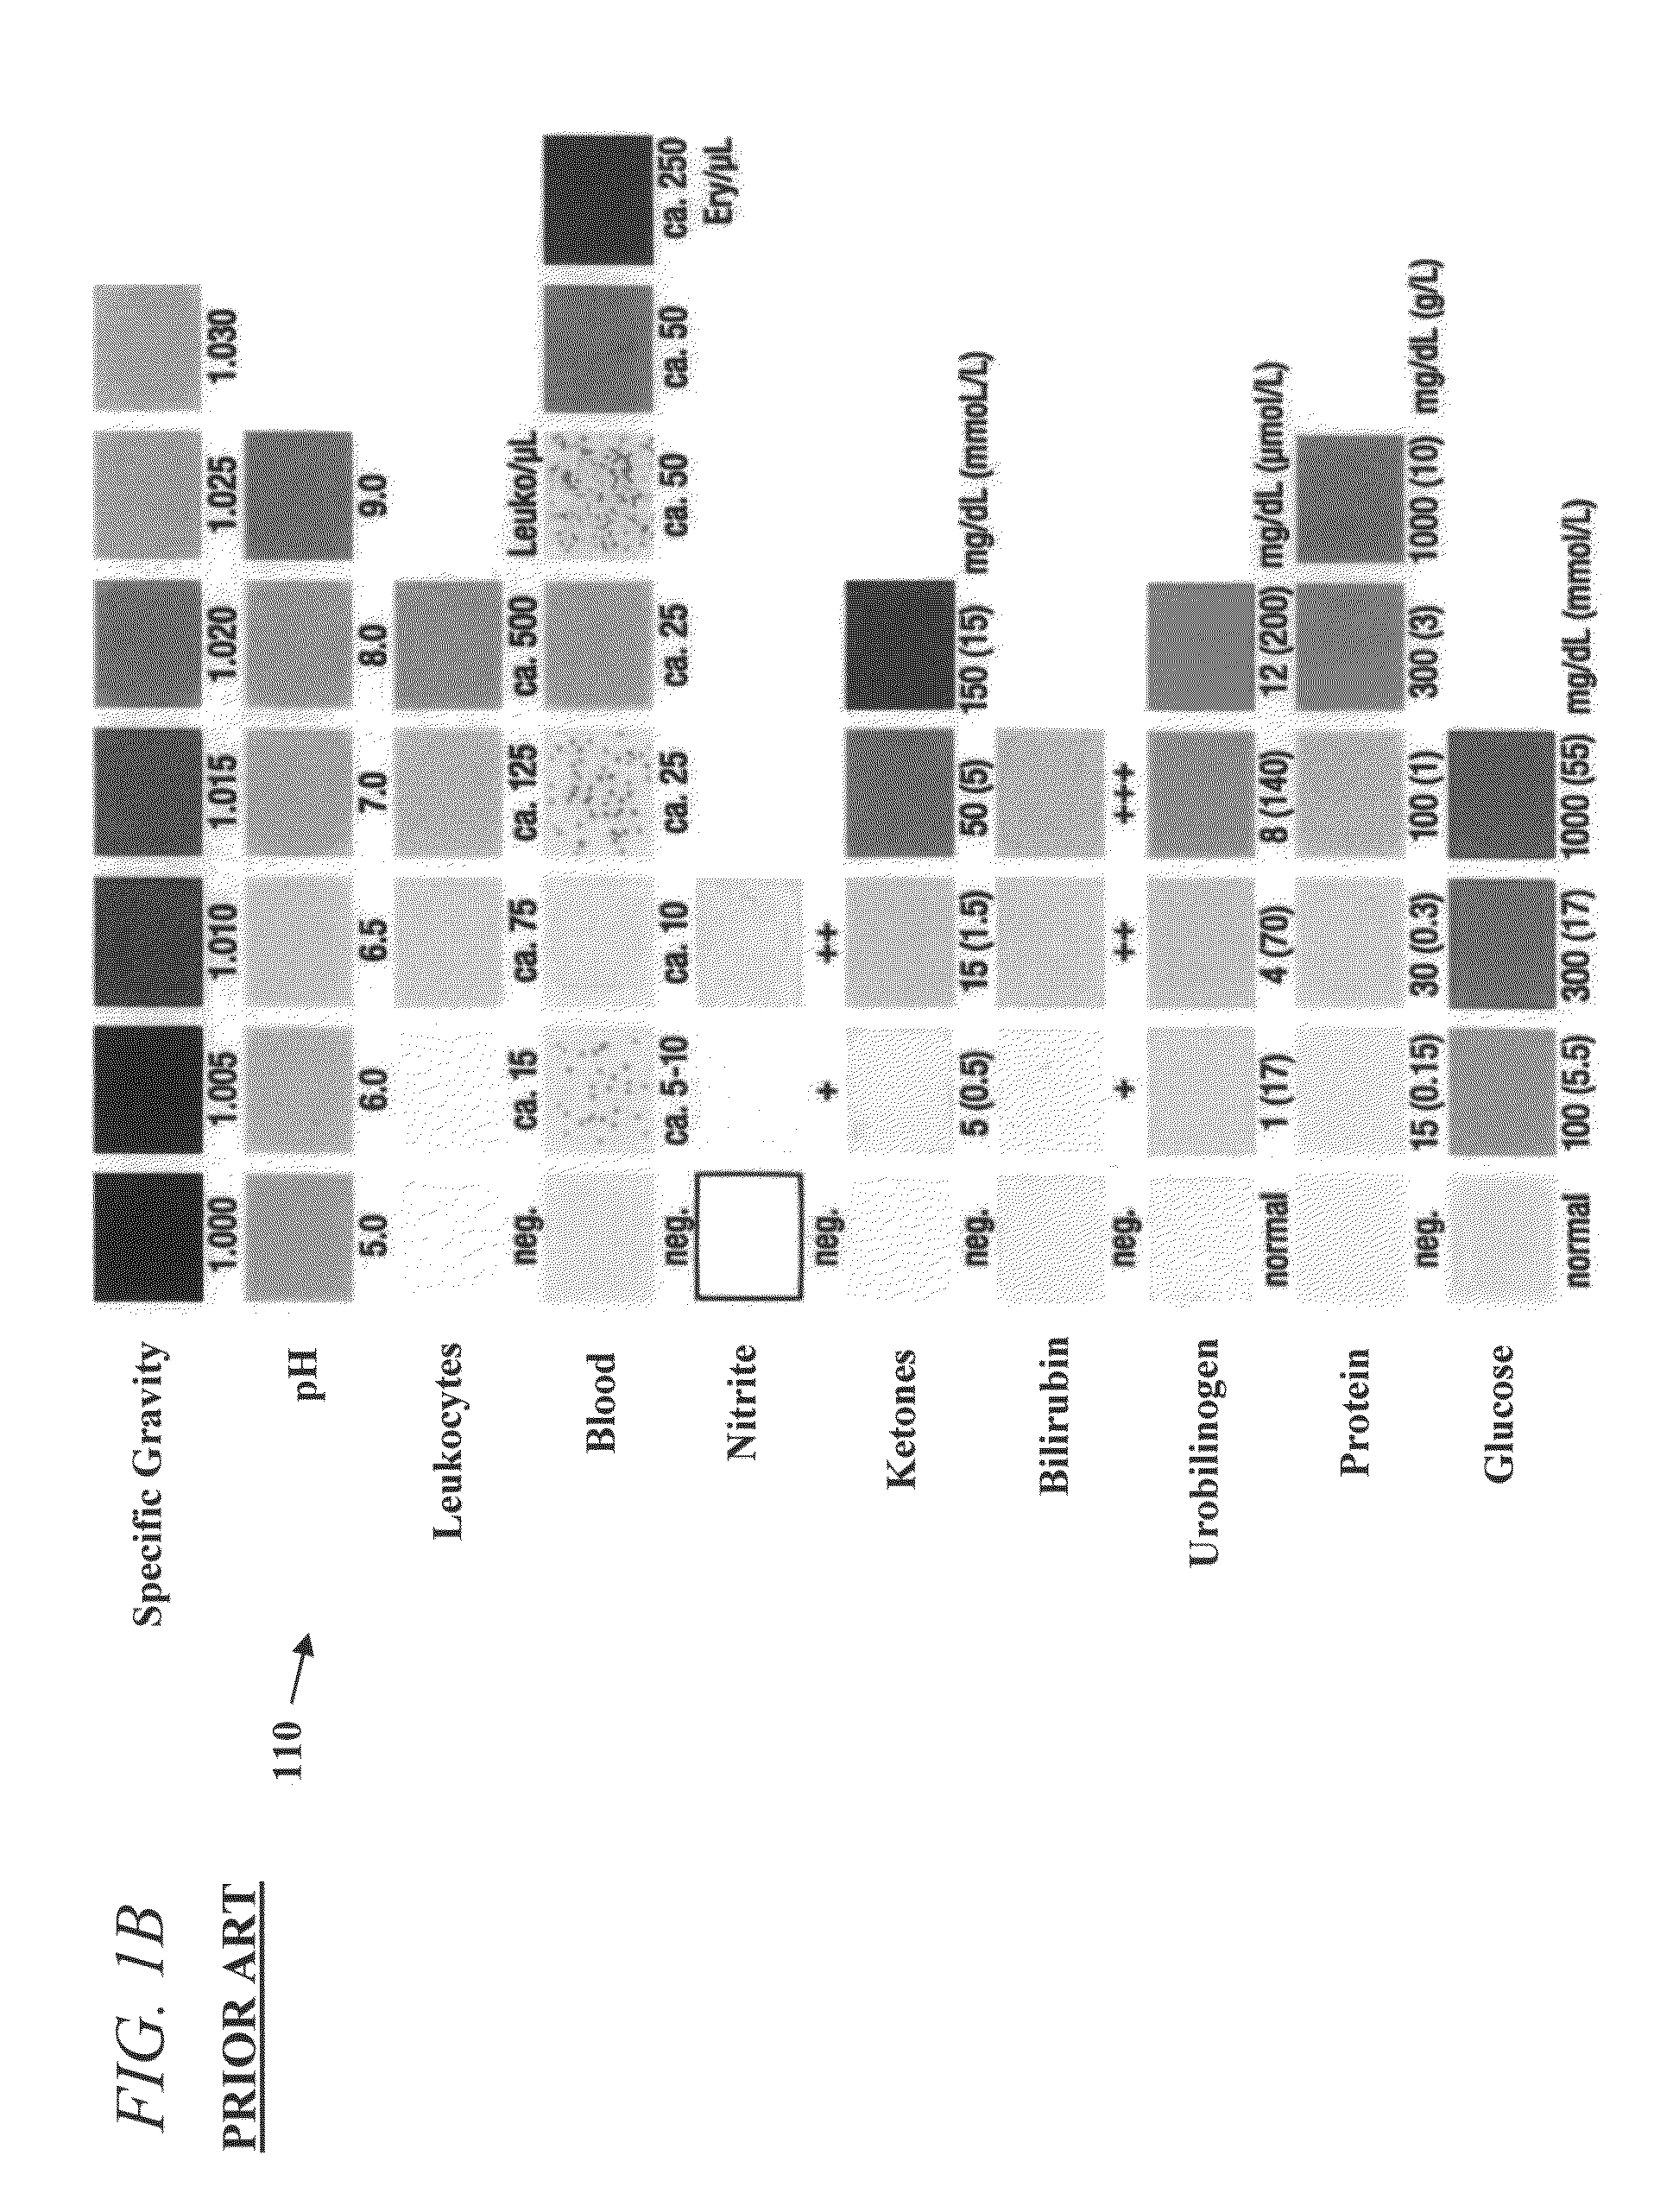 Method and apparatus for performing color-based reaction testing of biological materials